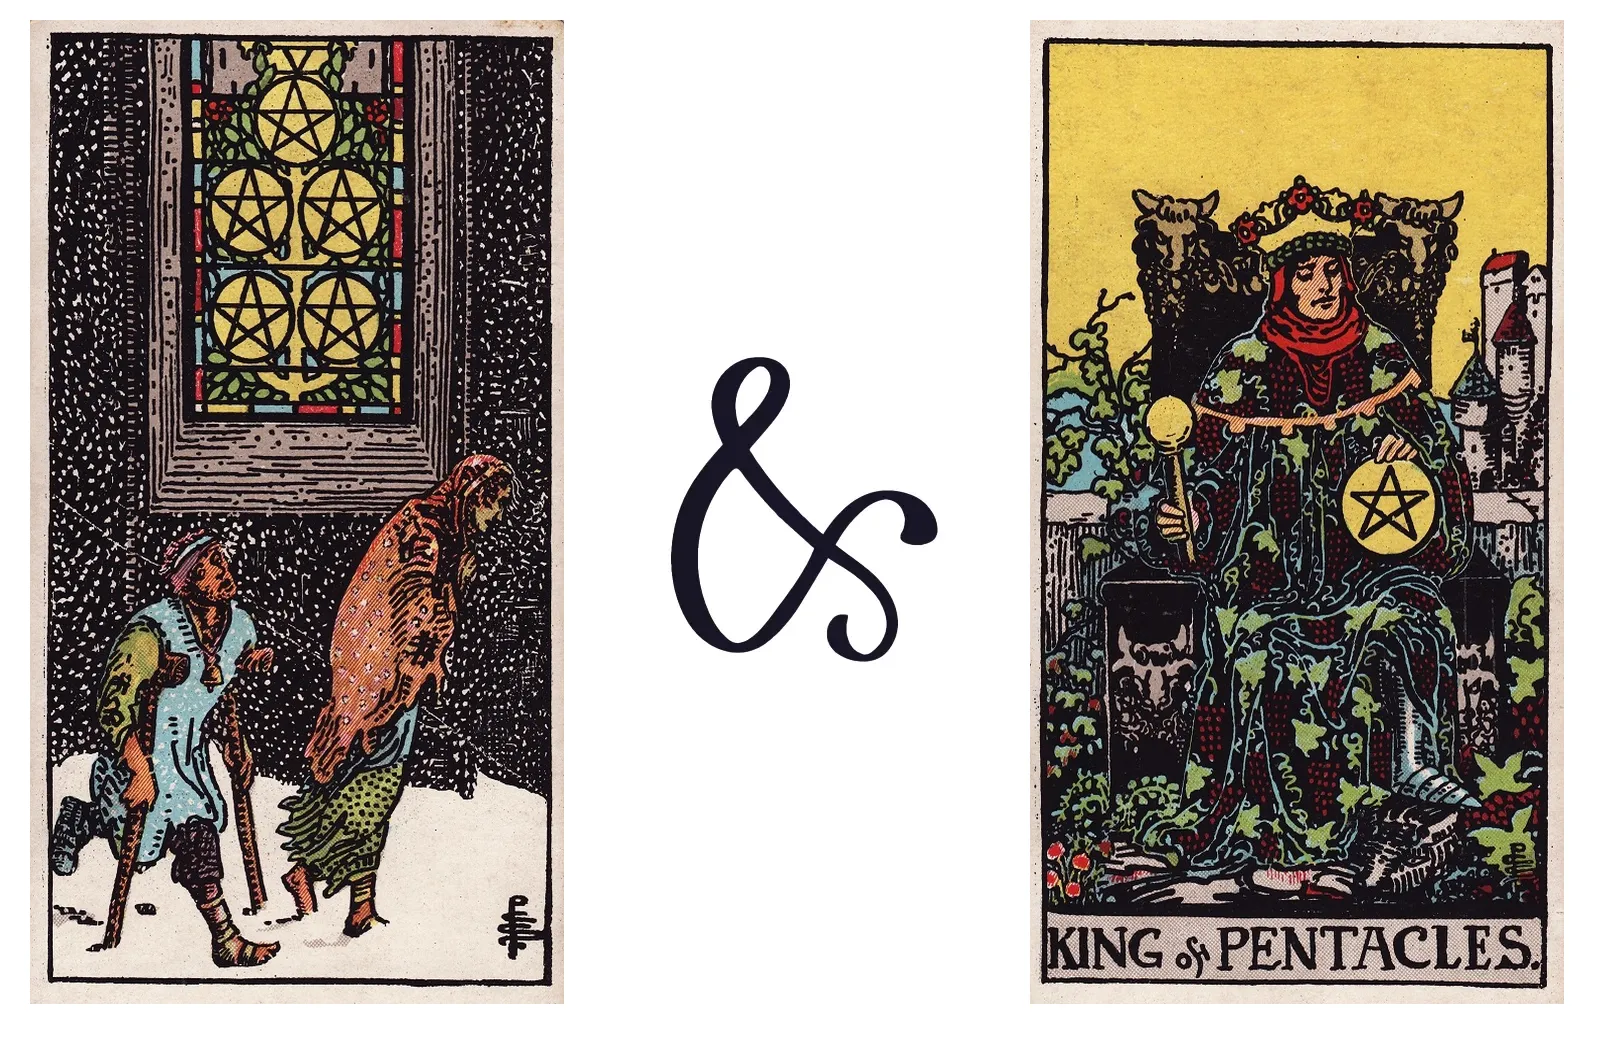 Five of Pentacles and King of Pentacles